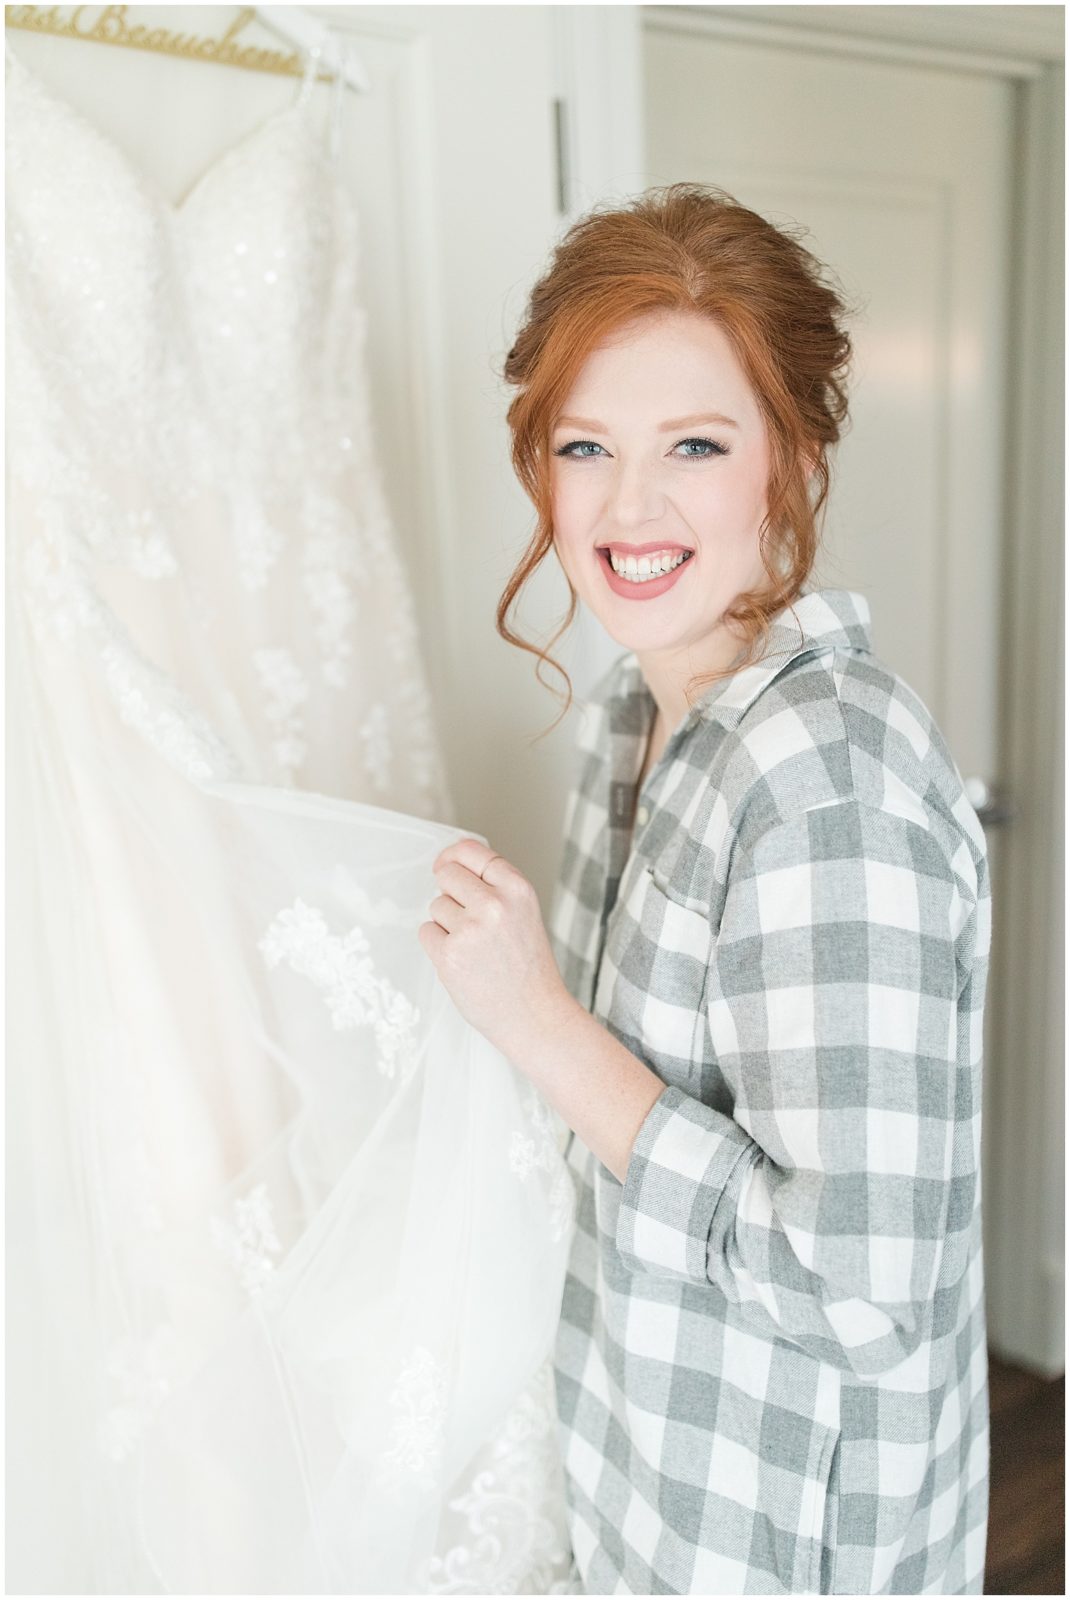 Bride Getting Ready | Wedding in Sioux City, Iowa shot by Jessica Brees Photography | Sioux City Wedding Photographer